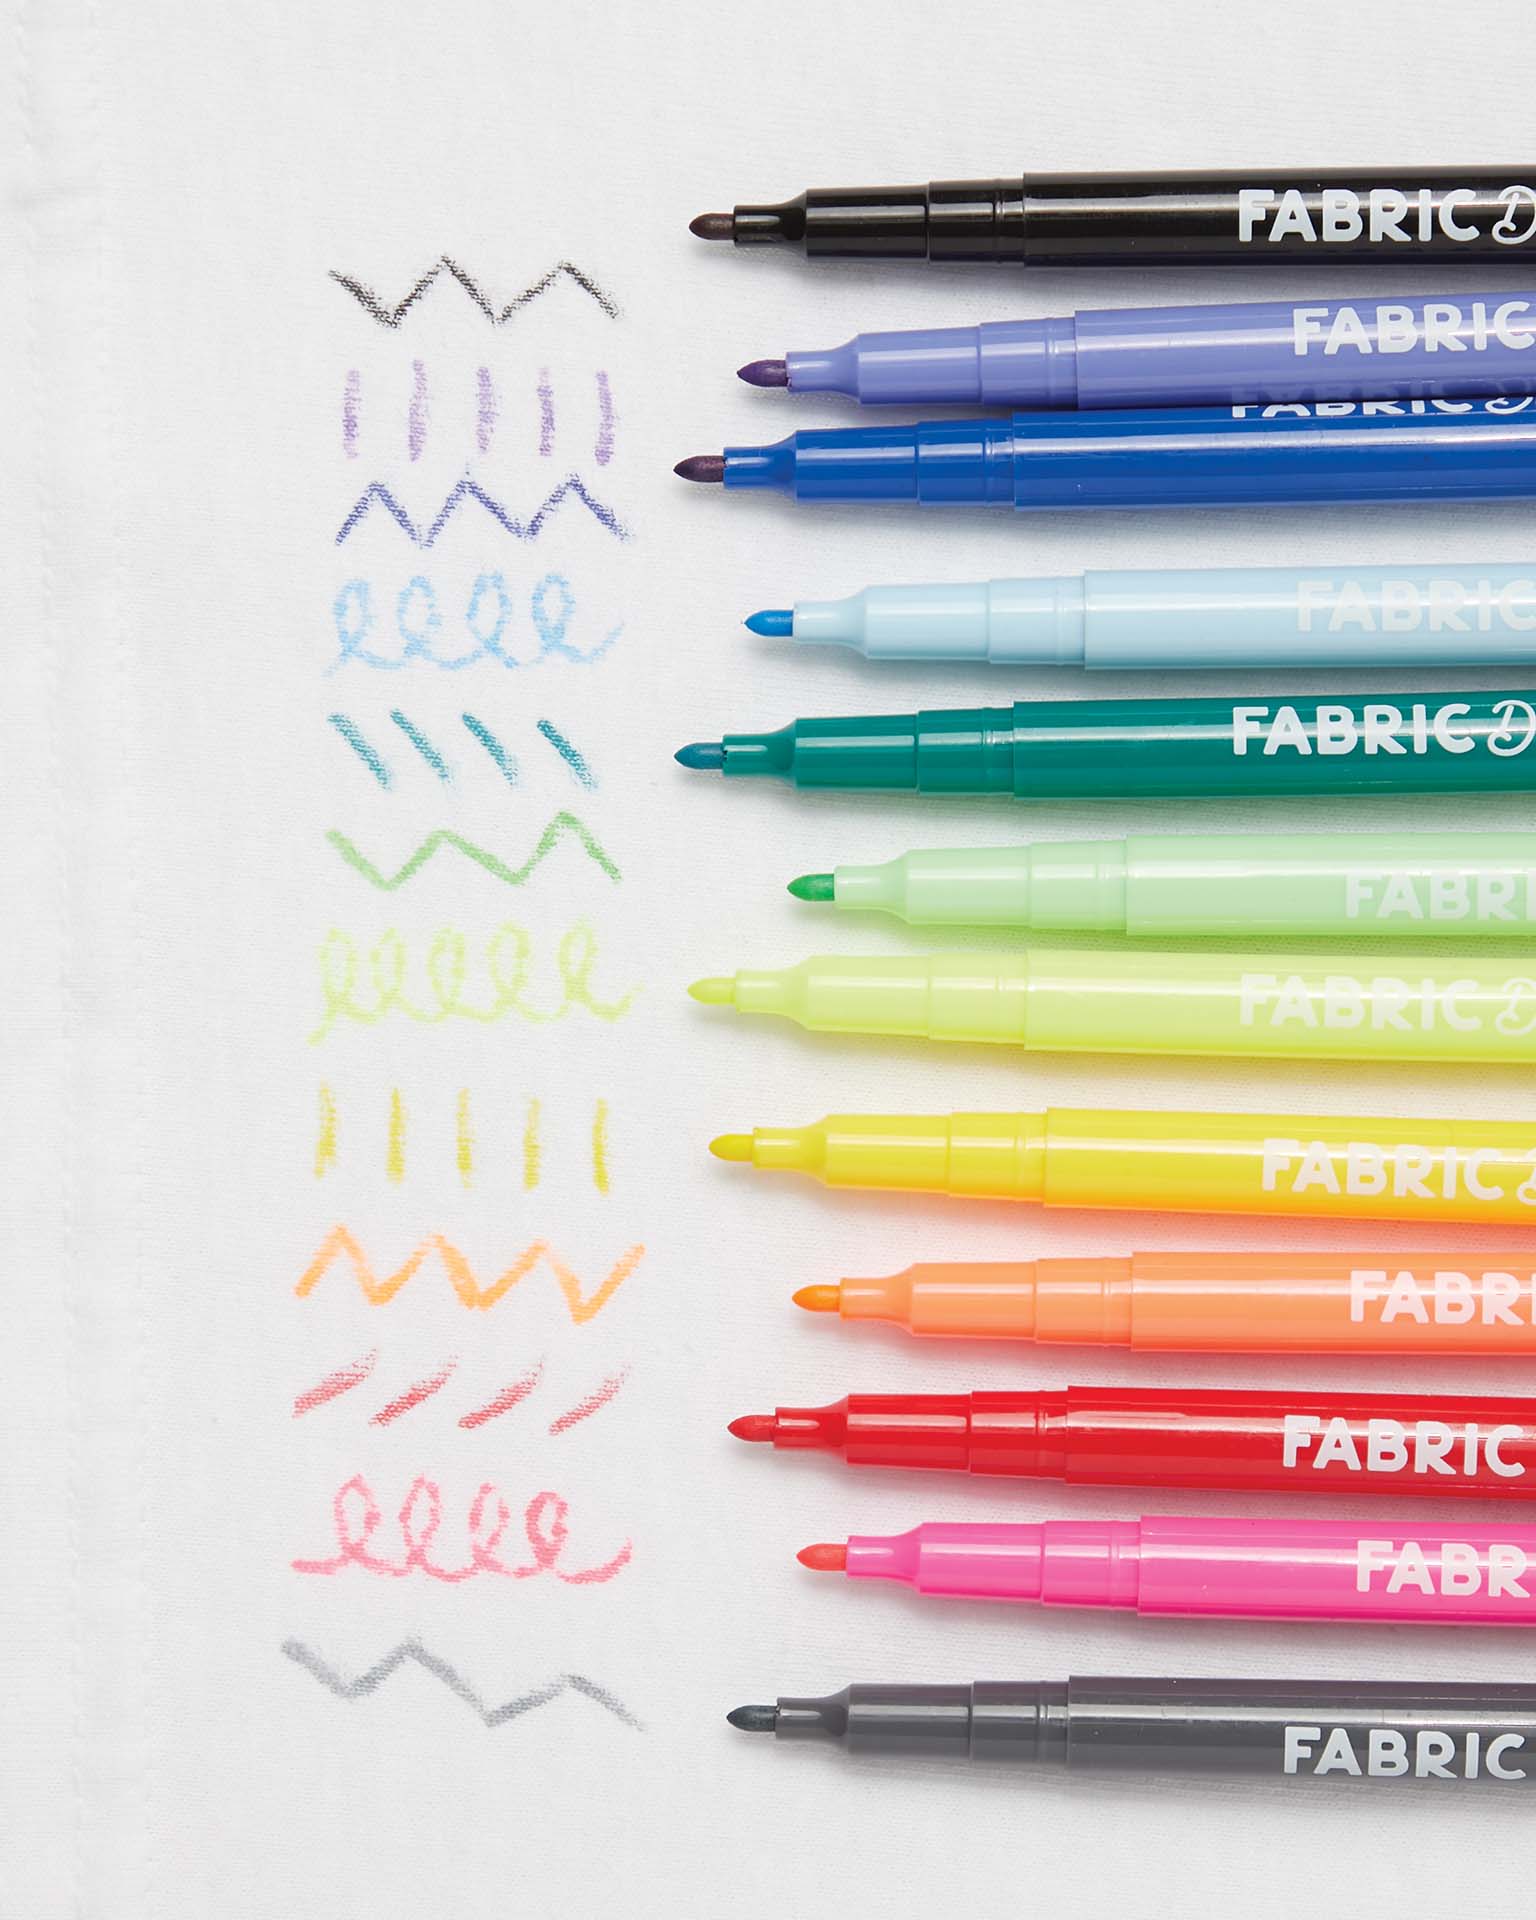 ooly fabric doodlers markers - Little